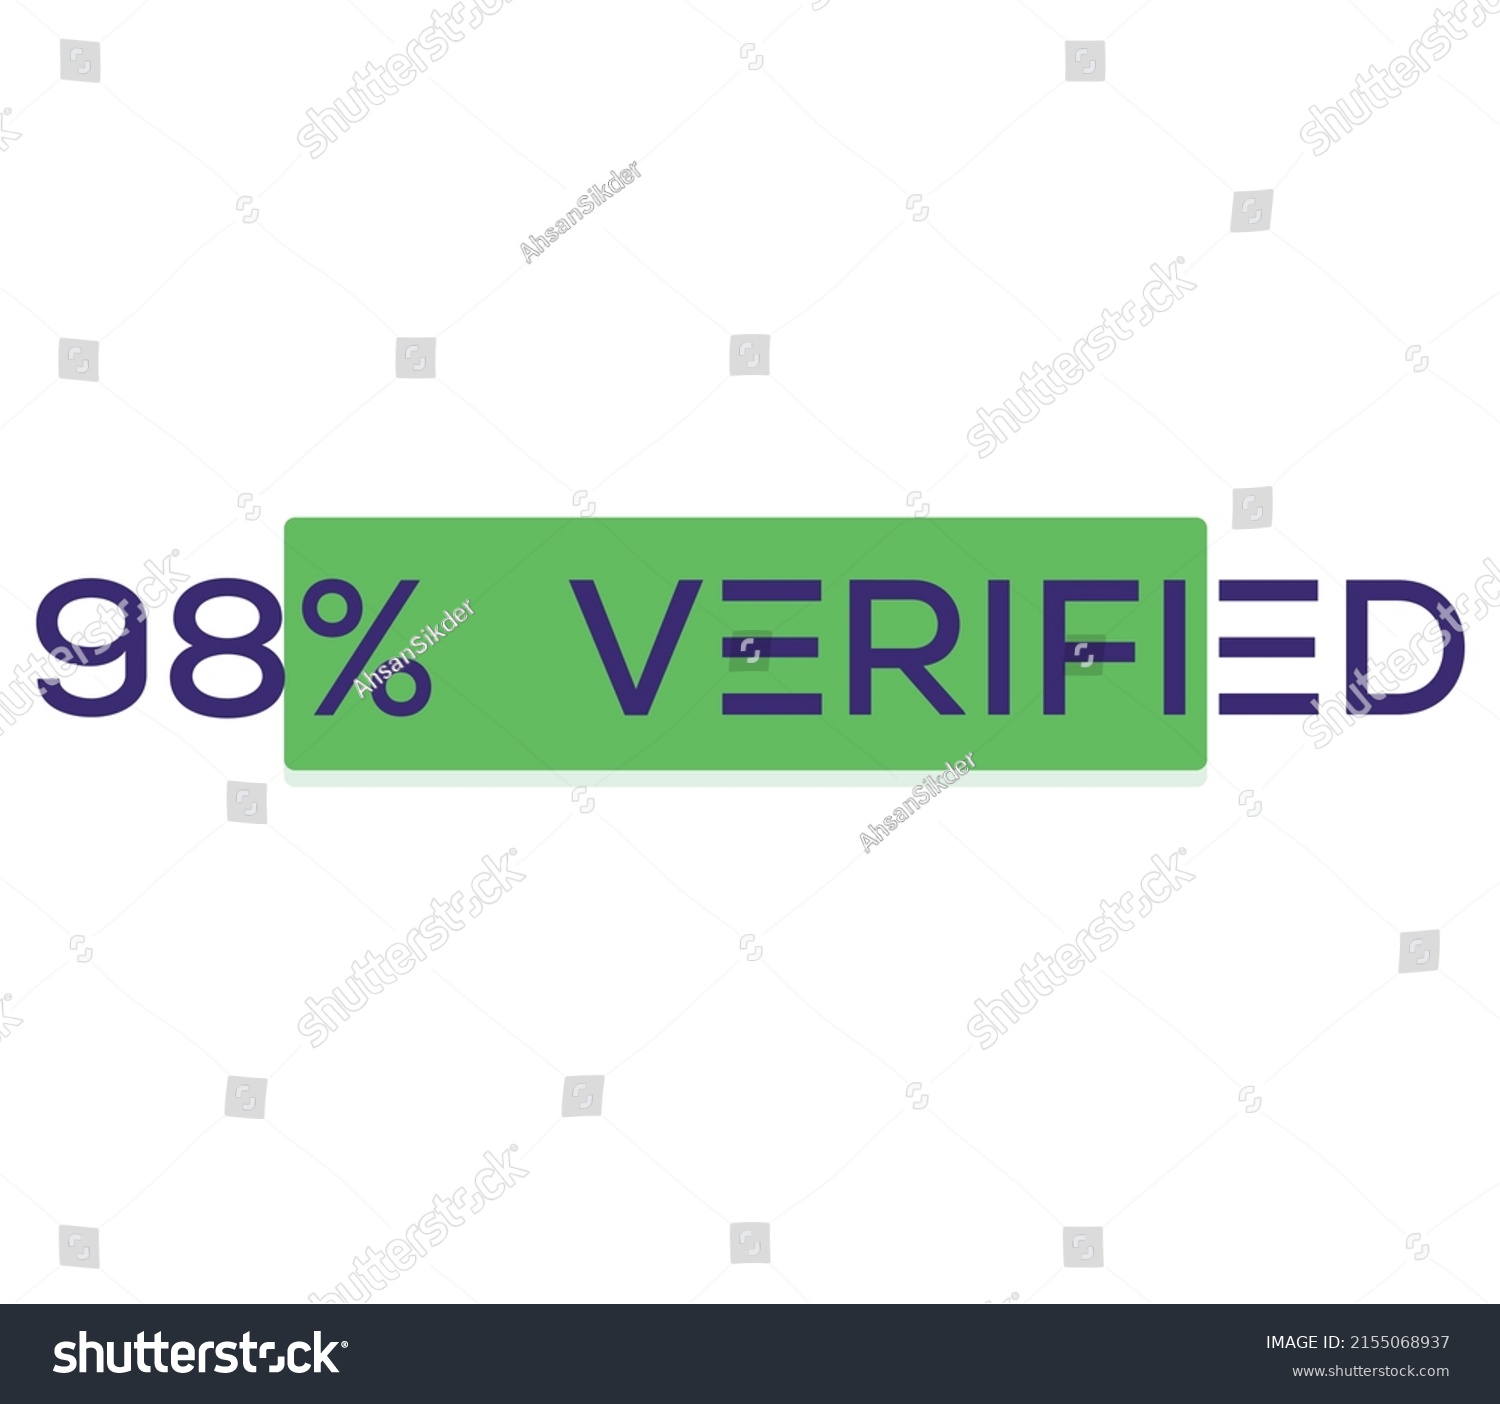 98% percentage verified vector art illustration with fantastic font and green color #2155068937